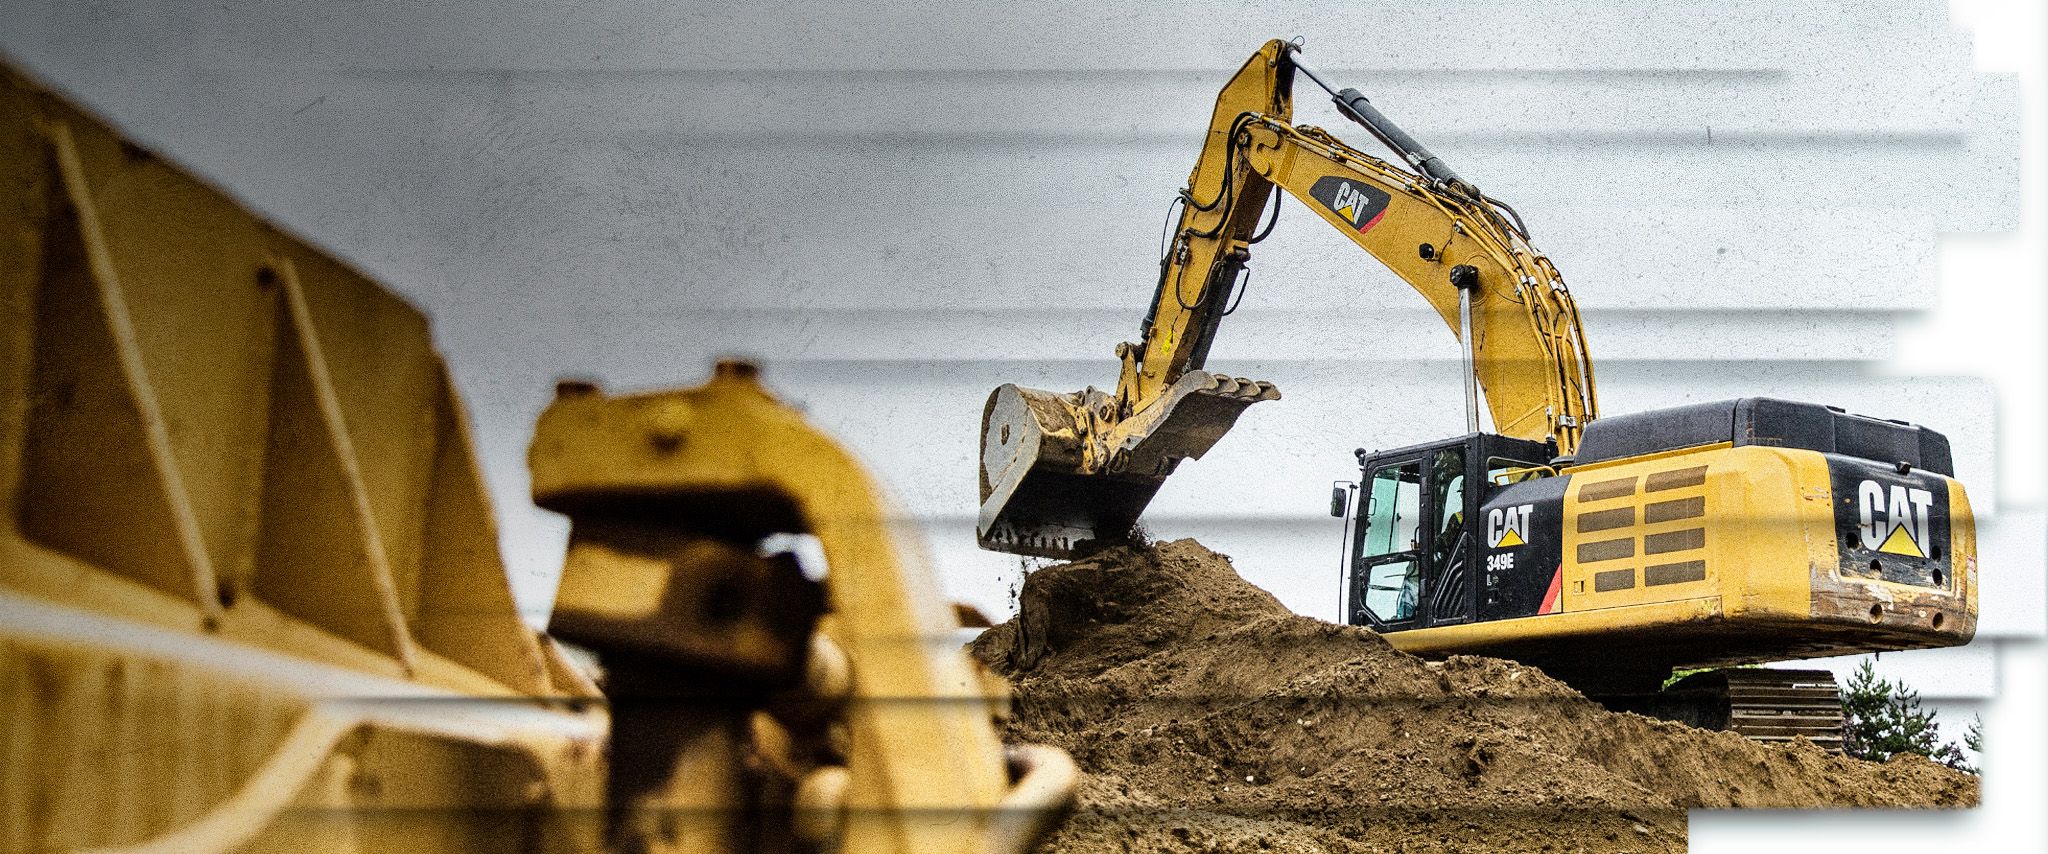 Tips for Buying Used Heavy Equipment Online